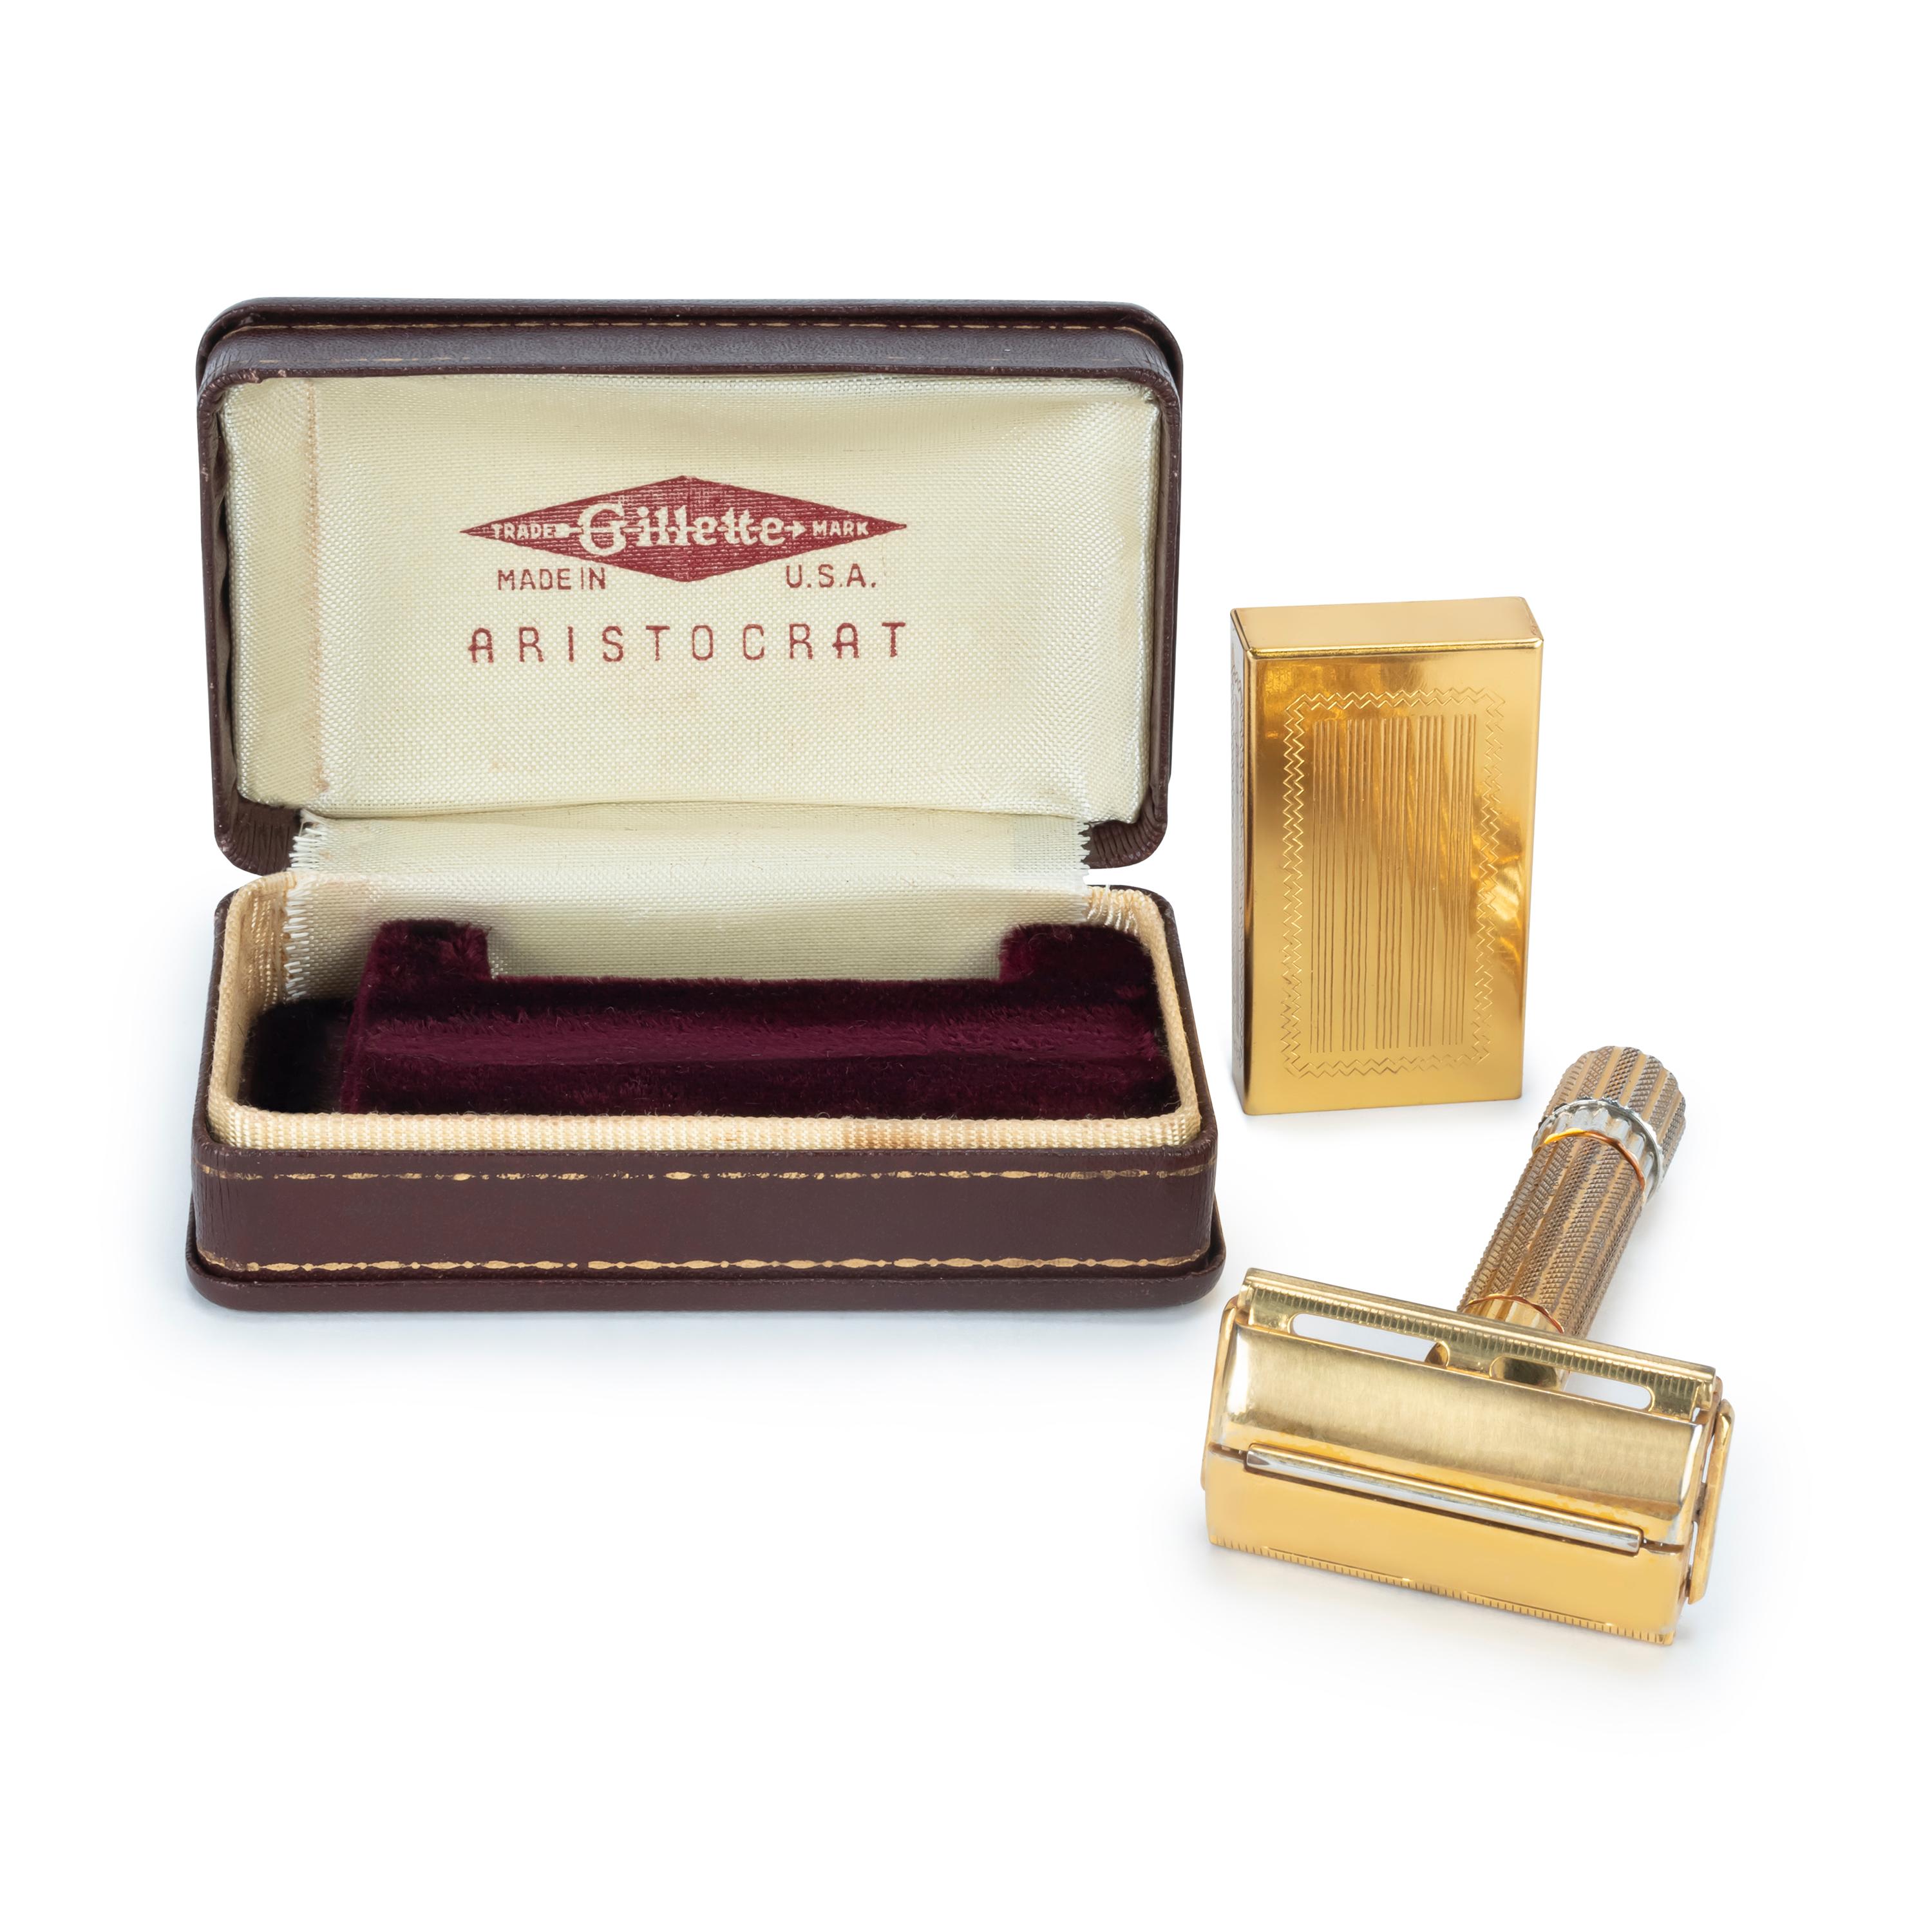 Vintage Gillette Aristocrat Safety Gold plated Razor with Gold plated Case & gold plated Blade Holder. Red luxuries velvet on the inside with cream trimmings and chocolate lather on the outside. They sure don’t make them like this anymore. 
You know